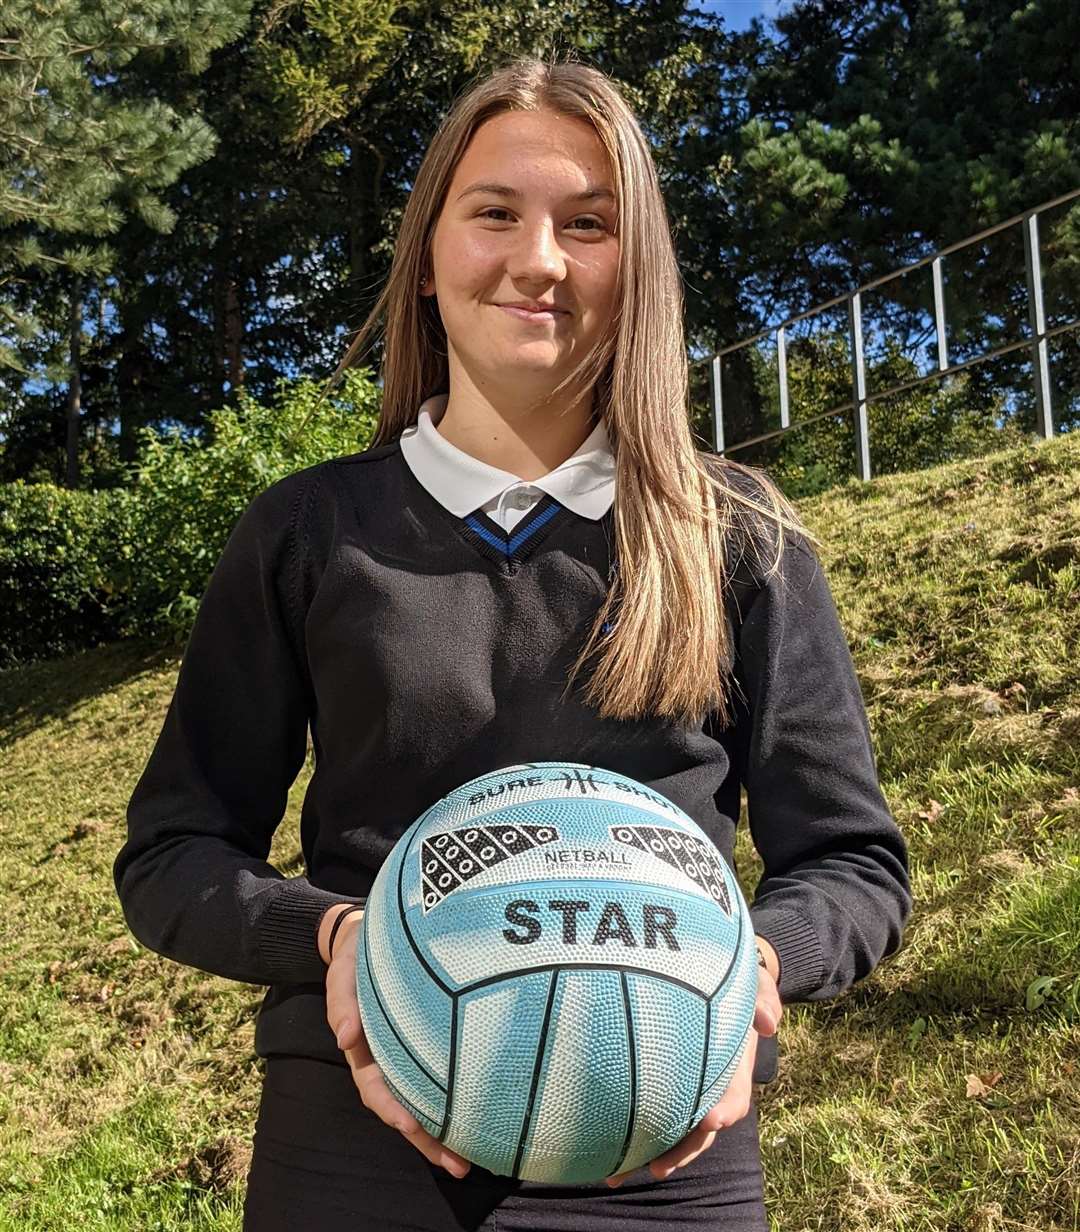 Ava Wincott is balancing her netball commitments with her studies